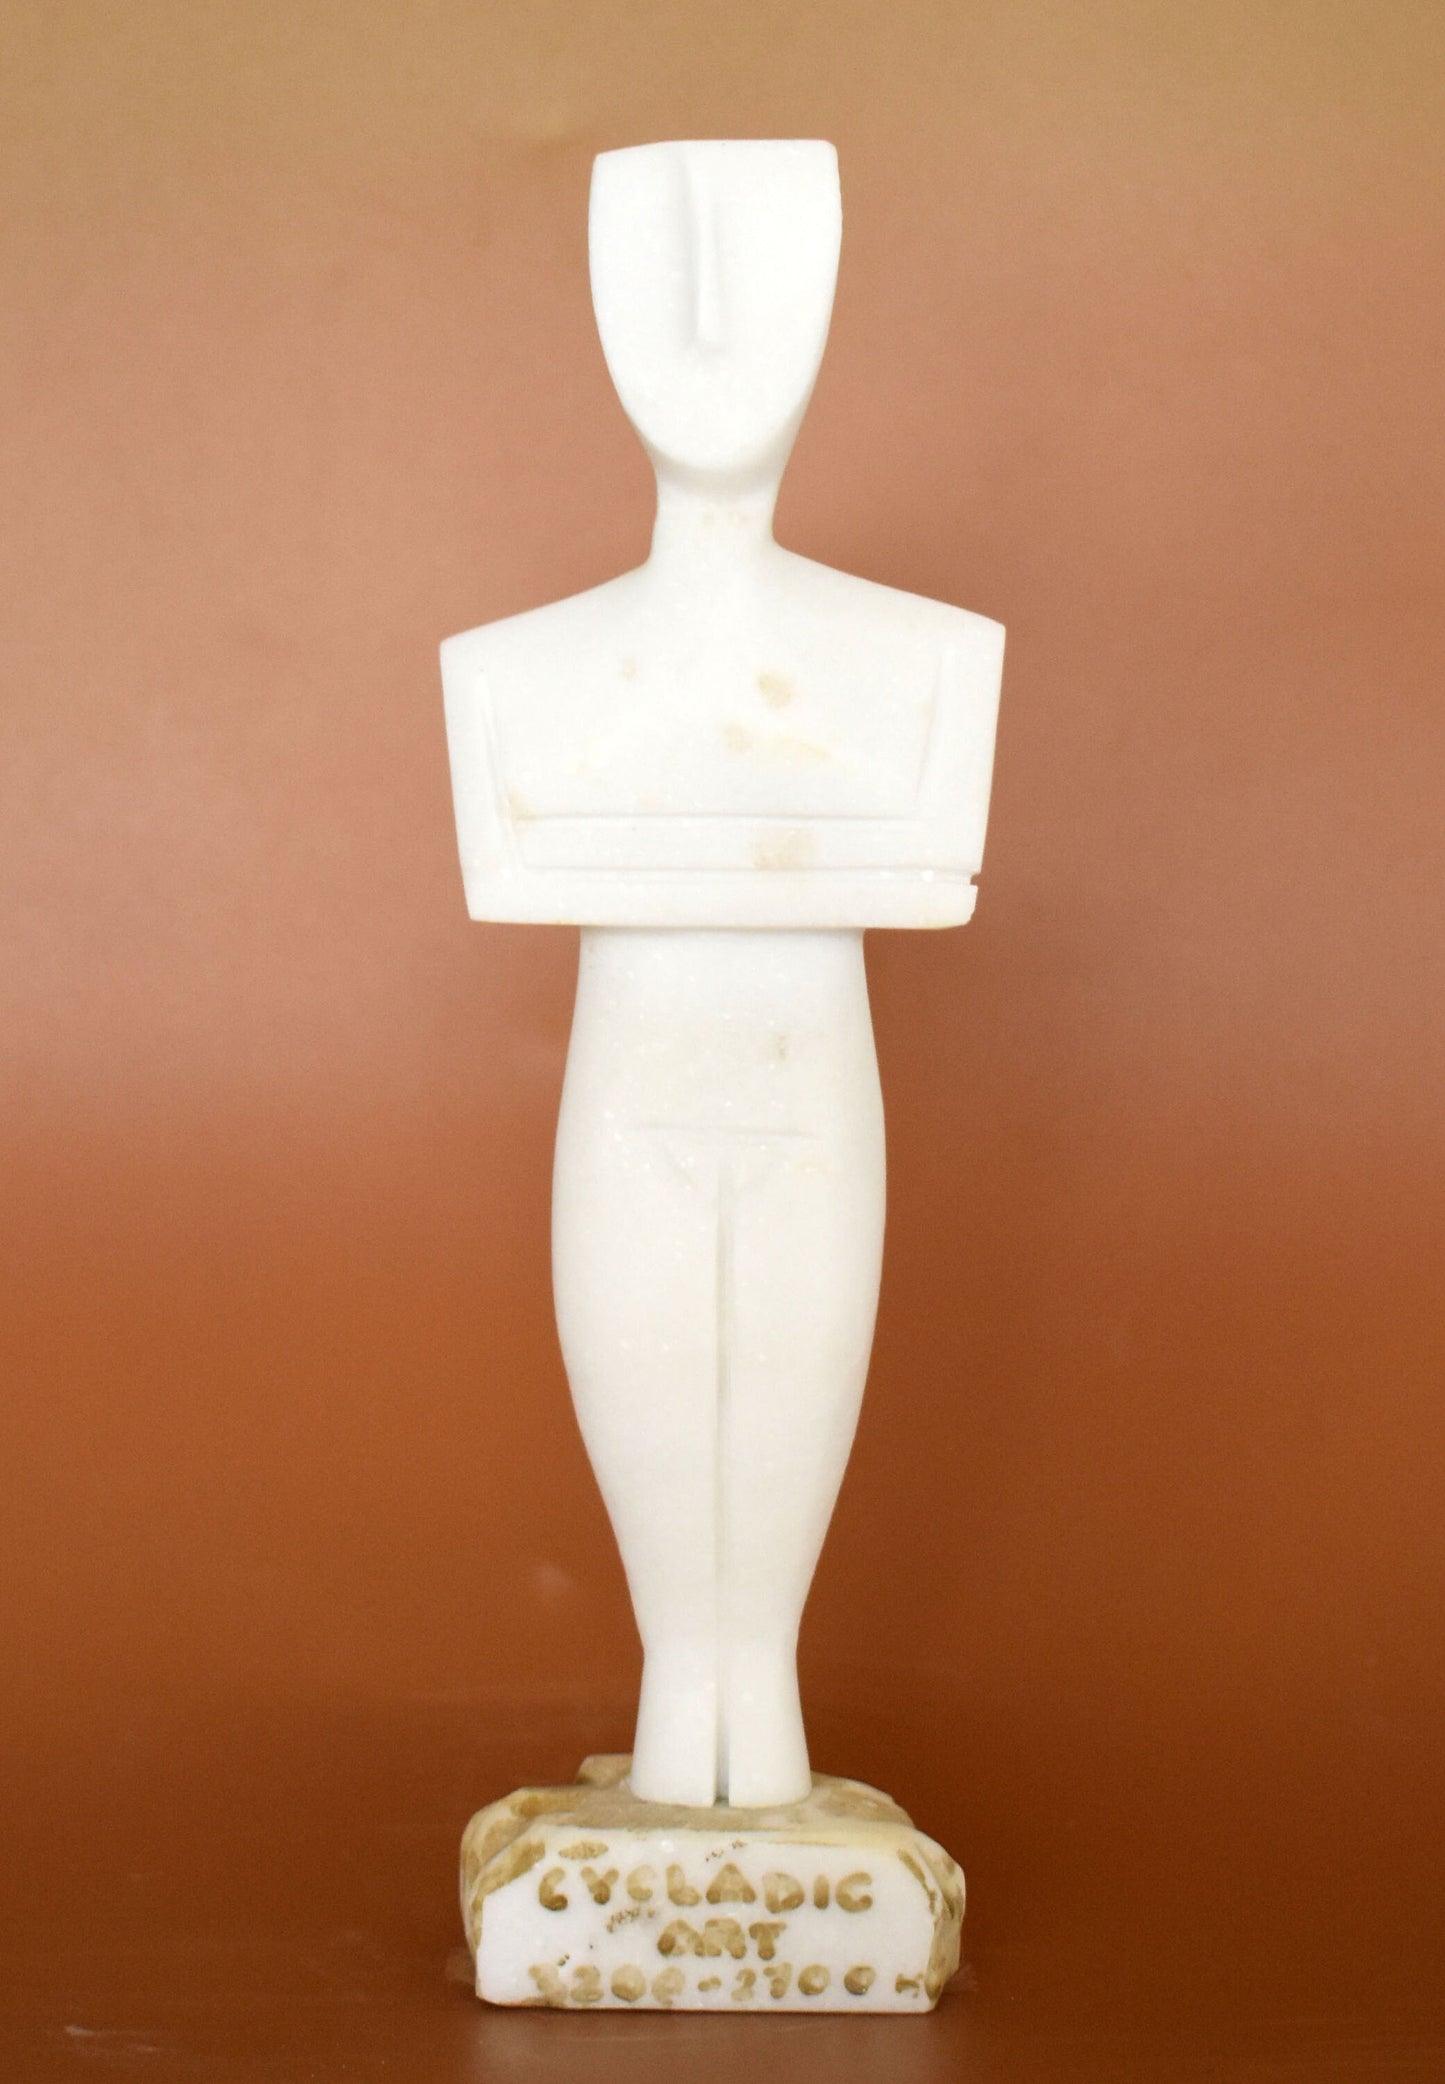 Cycladic Female Idol - Fertility Deity - Religious Functions, Worship and Funeral Practices - Figure from Keros Island, Greece - Real Marble